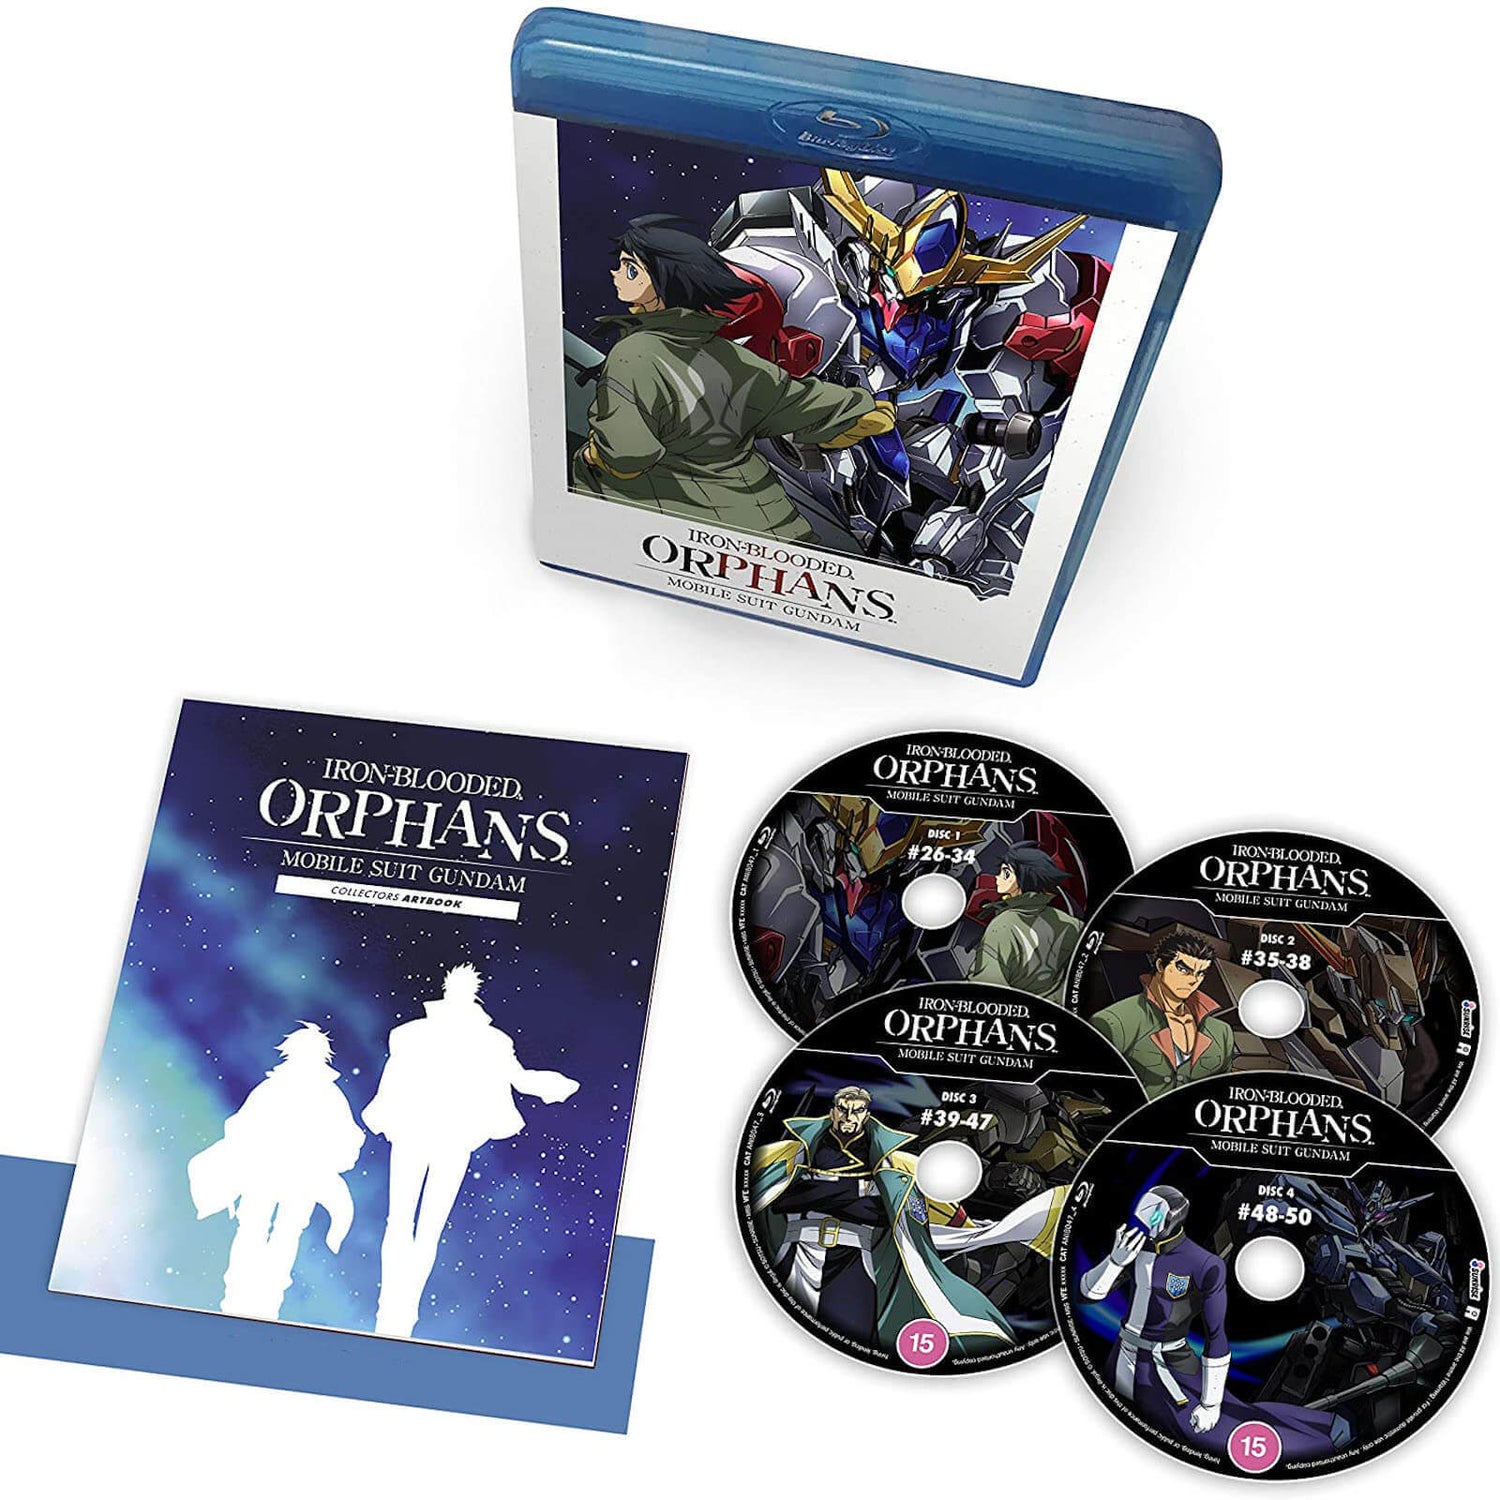 Mobile Suit Gundam Iron Blooded Orphans Teil 2 Collector's Edition